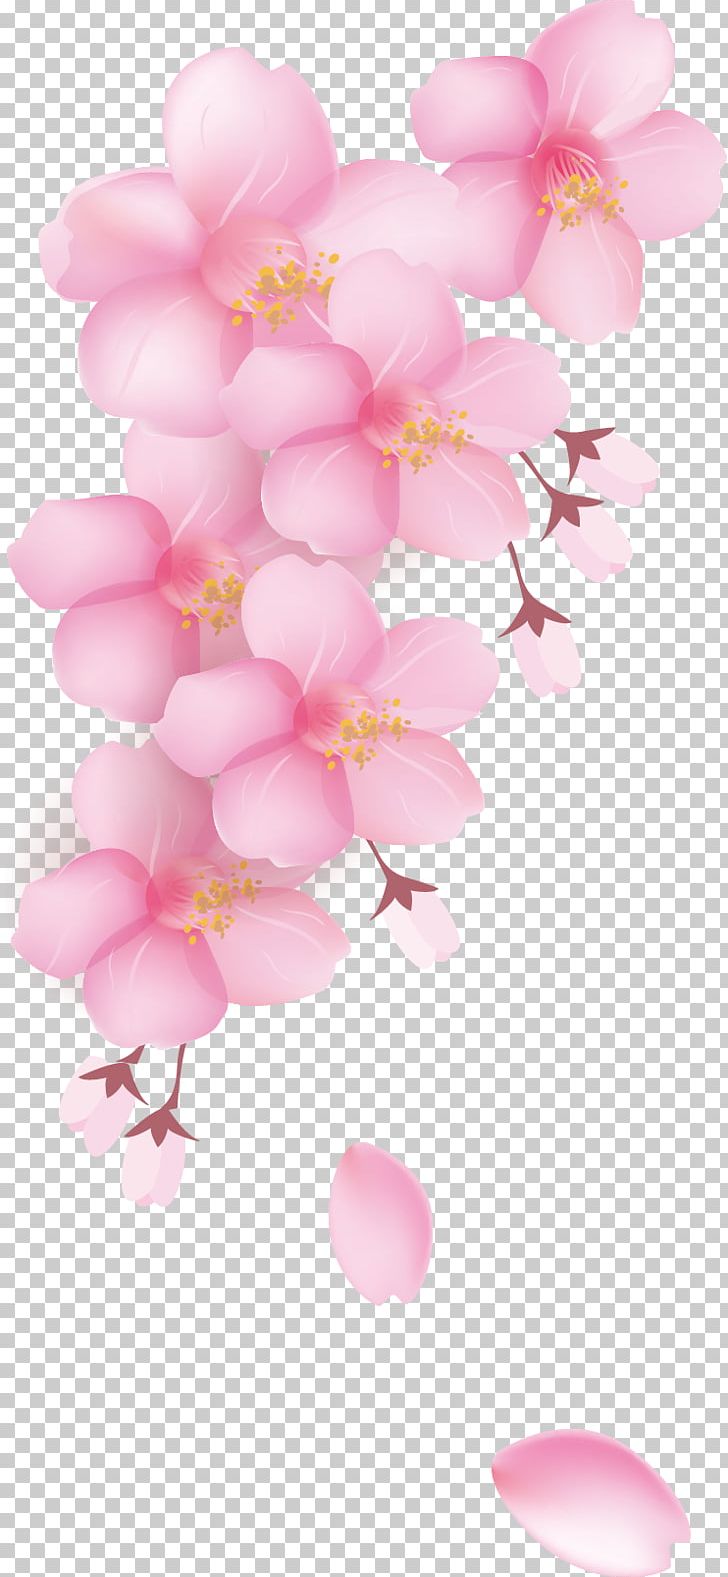 National Cherry Blossom Festival Petal PNG, Clipart, Balloon, Blossom, Branch, Cerasus, Cherry Free PNG Download